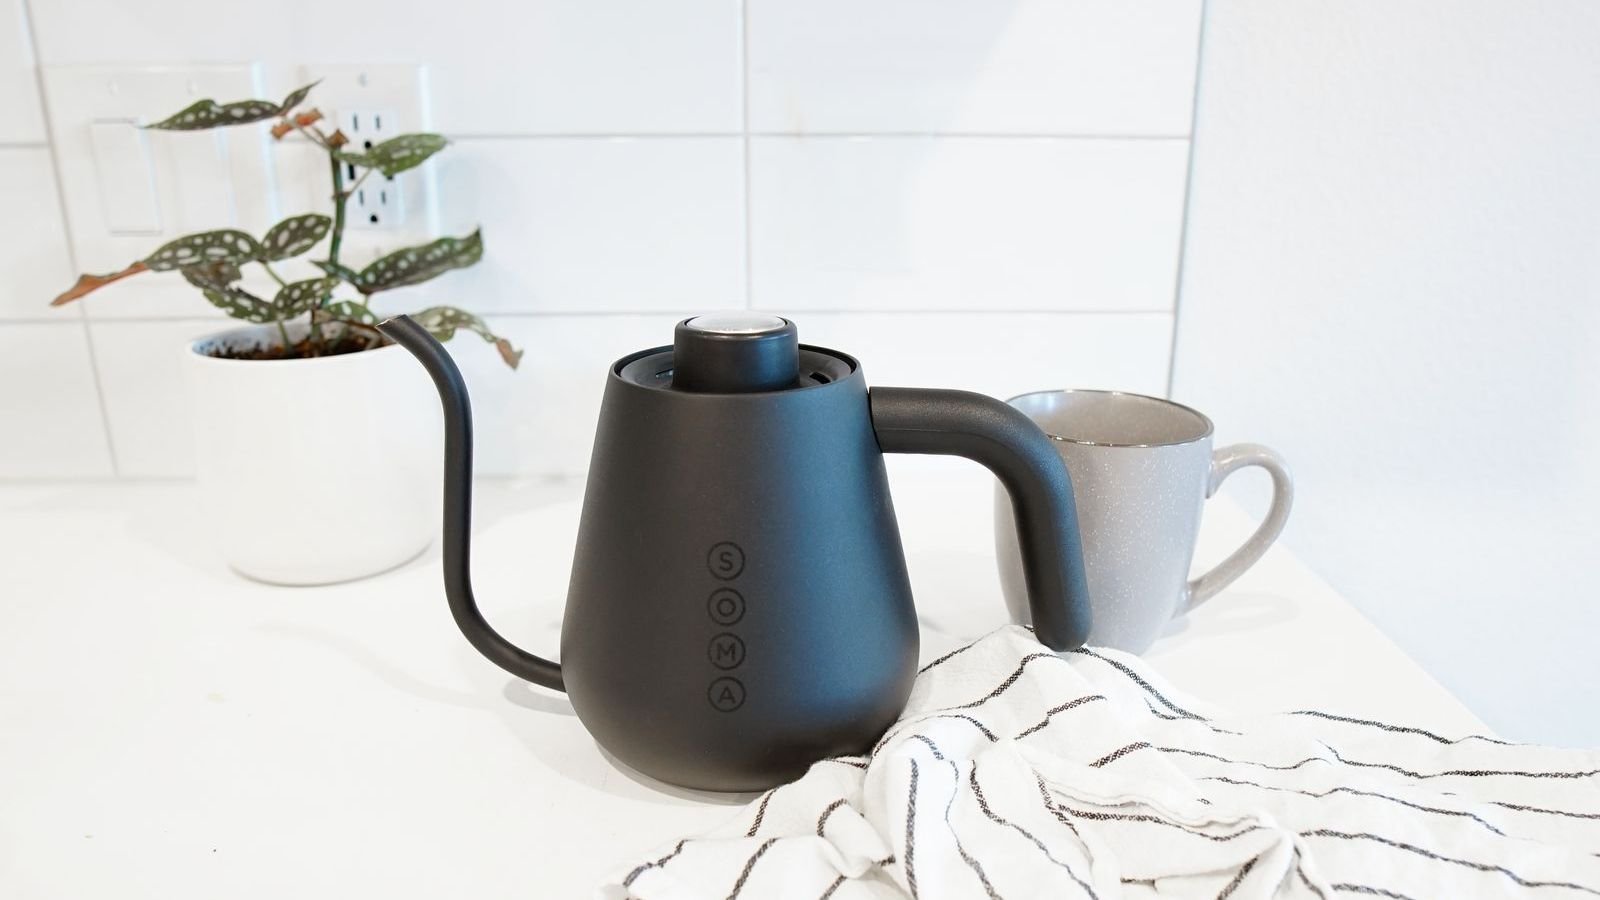 Soma Stainless Steel Kettle includes a brew-range thermometer and a stay-cool handle